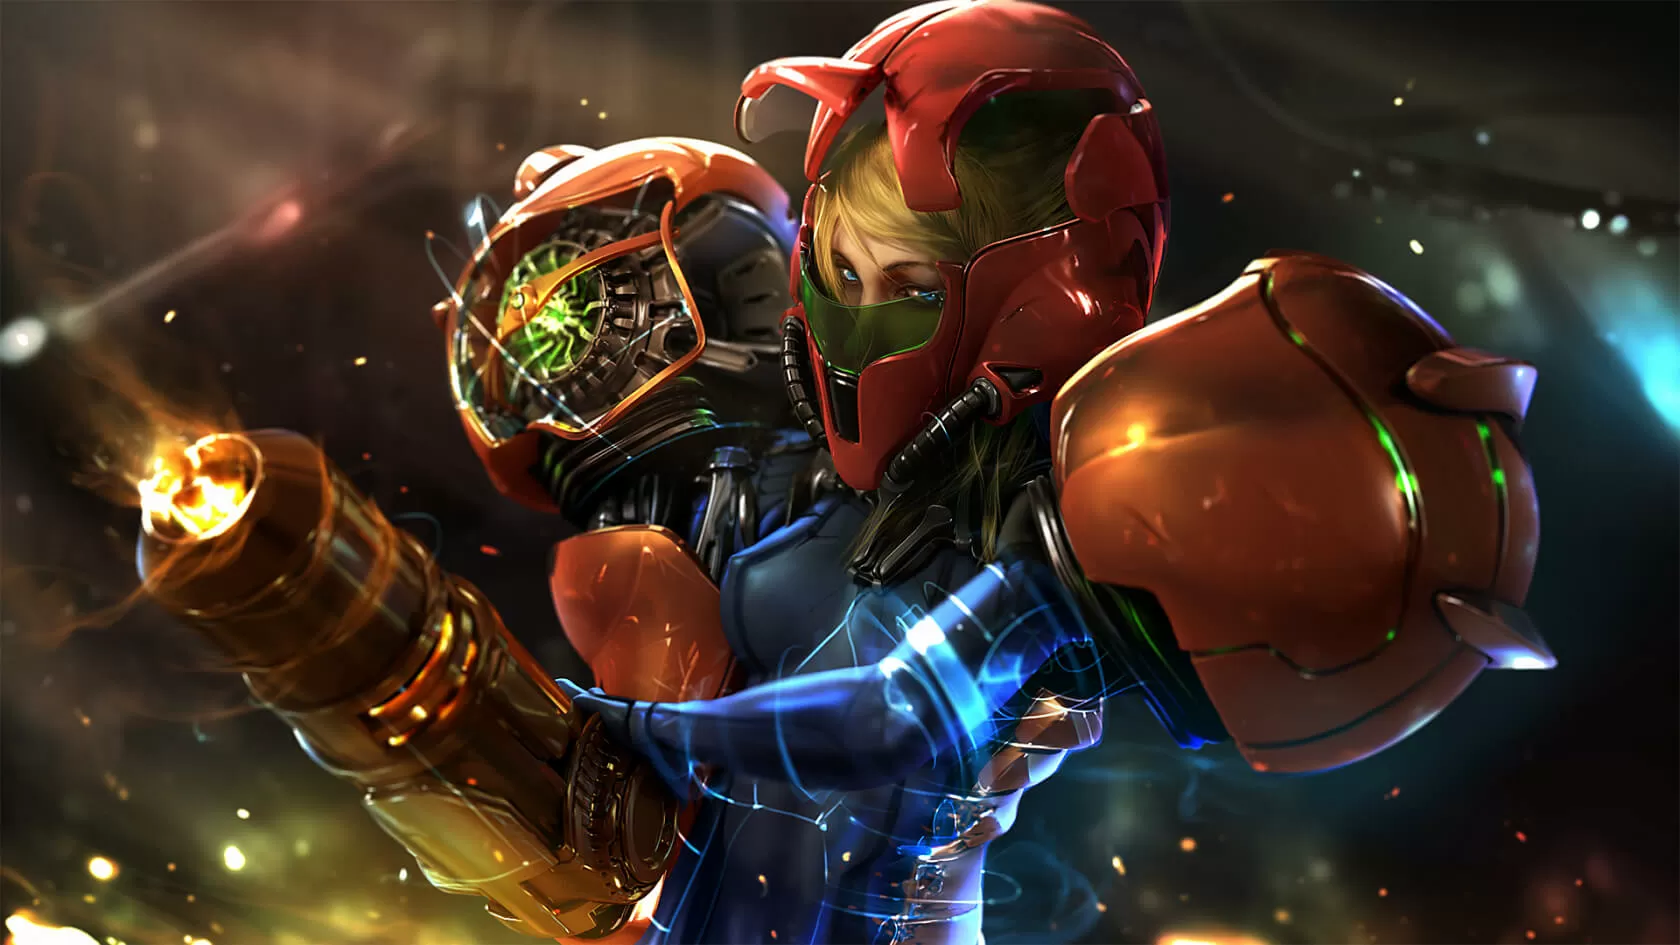 Bandai Namco is reportedly at work on Metroid Prime 4